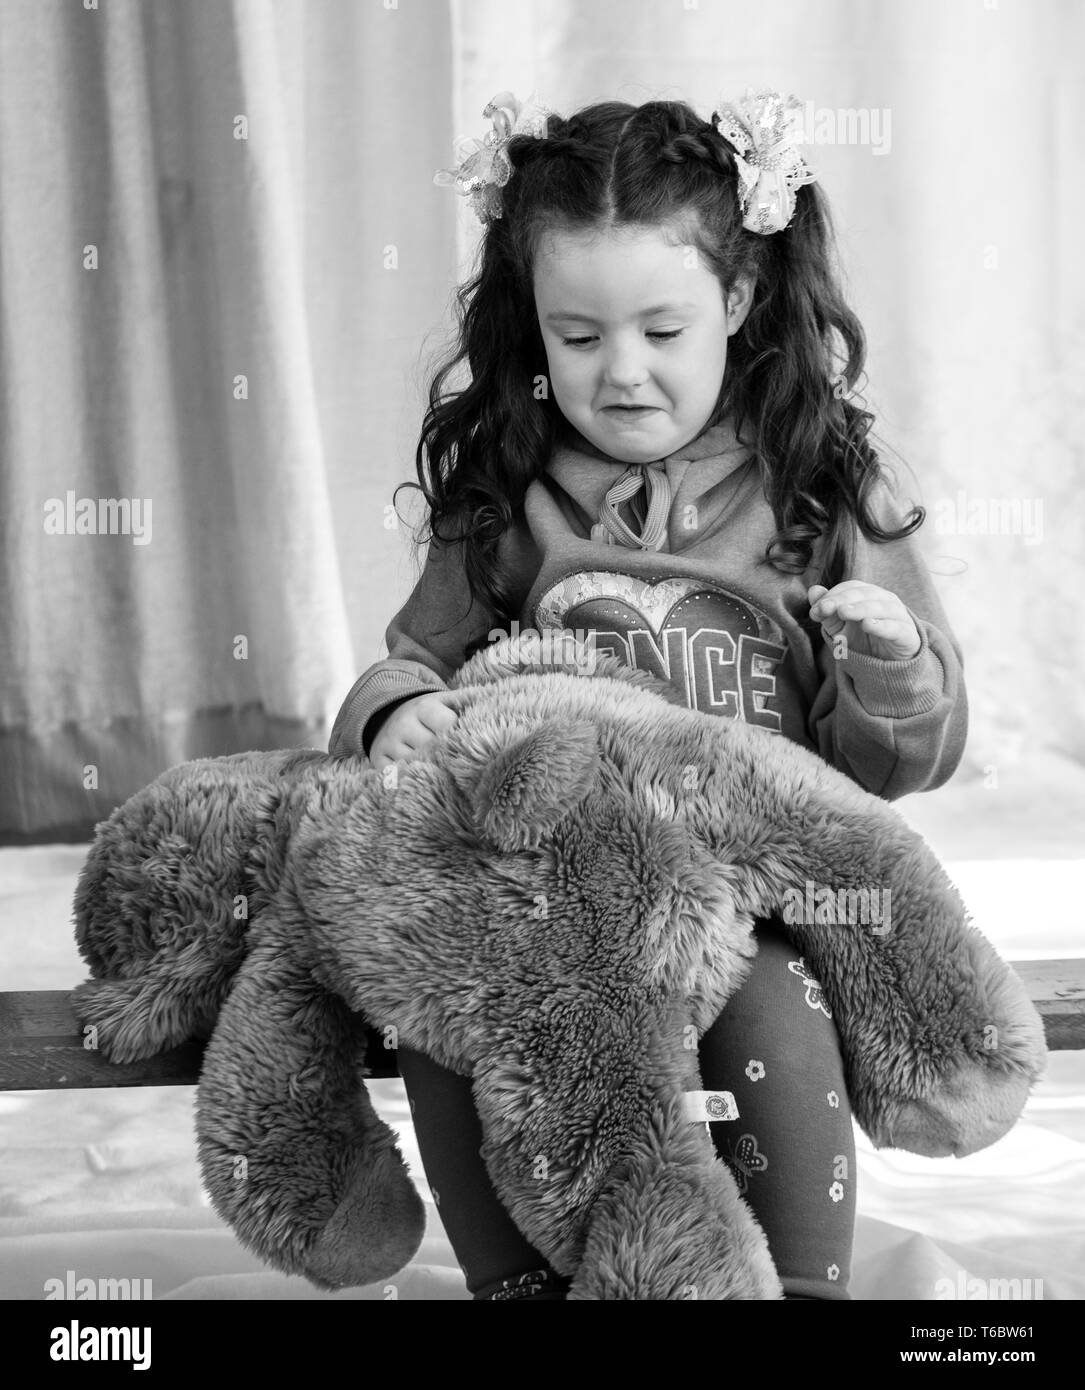 Angry little girl beating her teddy bear - domestic abuse concept. Girl 4-5 year old punishes toy bear. Stock Photo